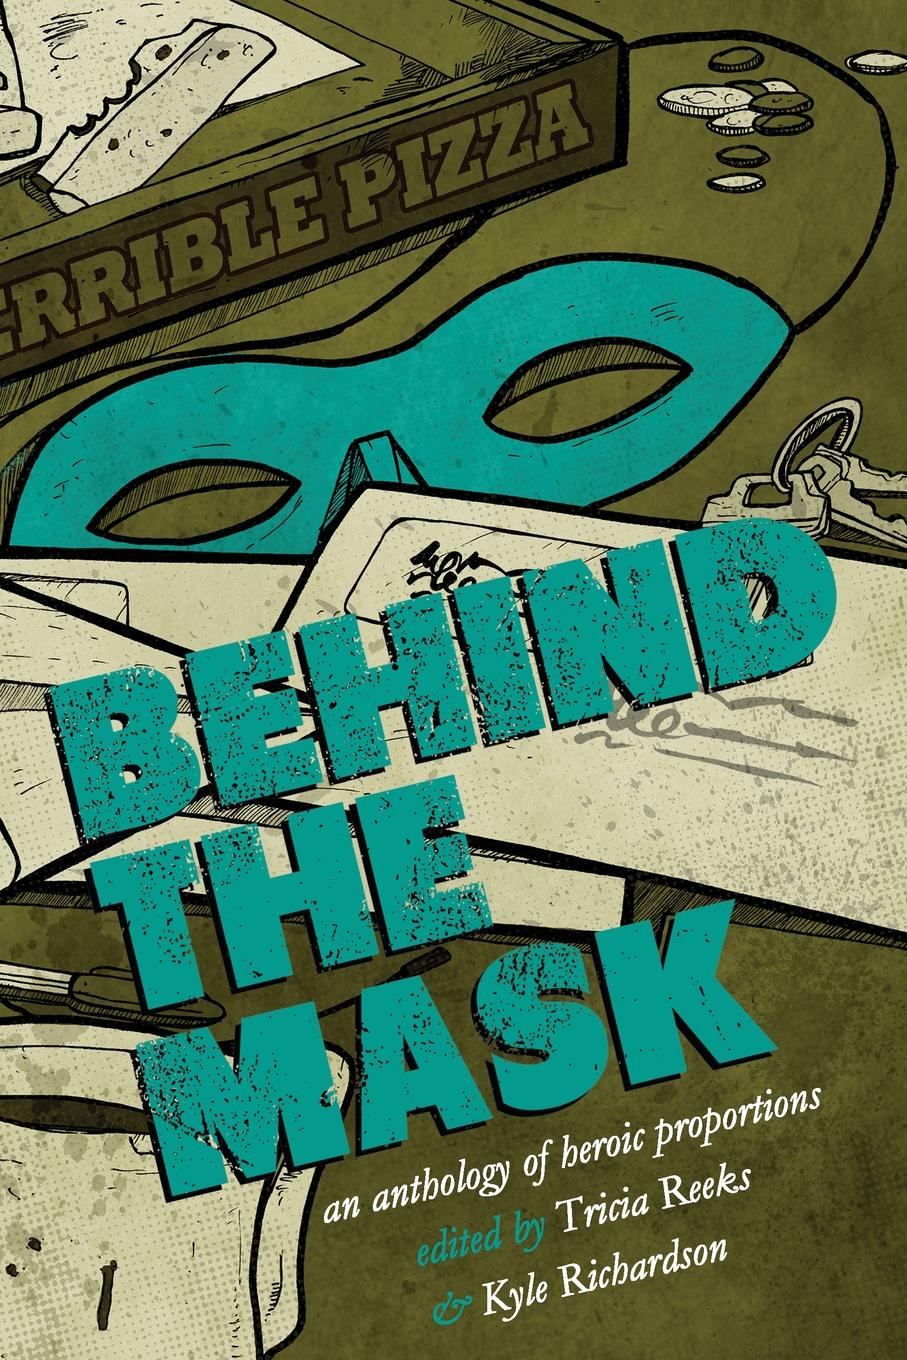 Behind the Mask. An Anthology of Heroic Proportions